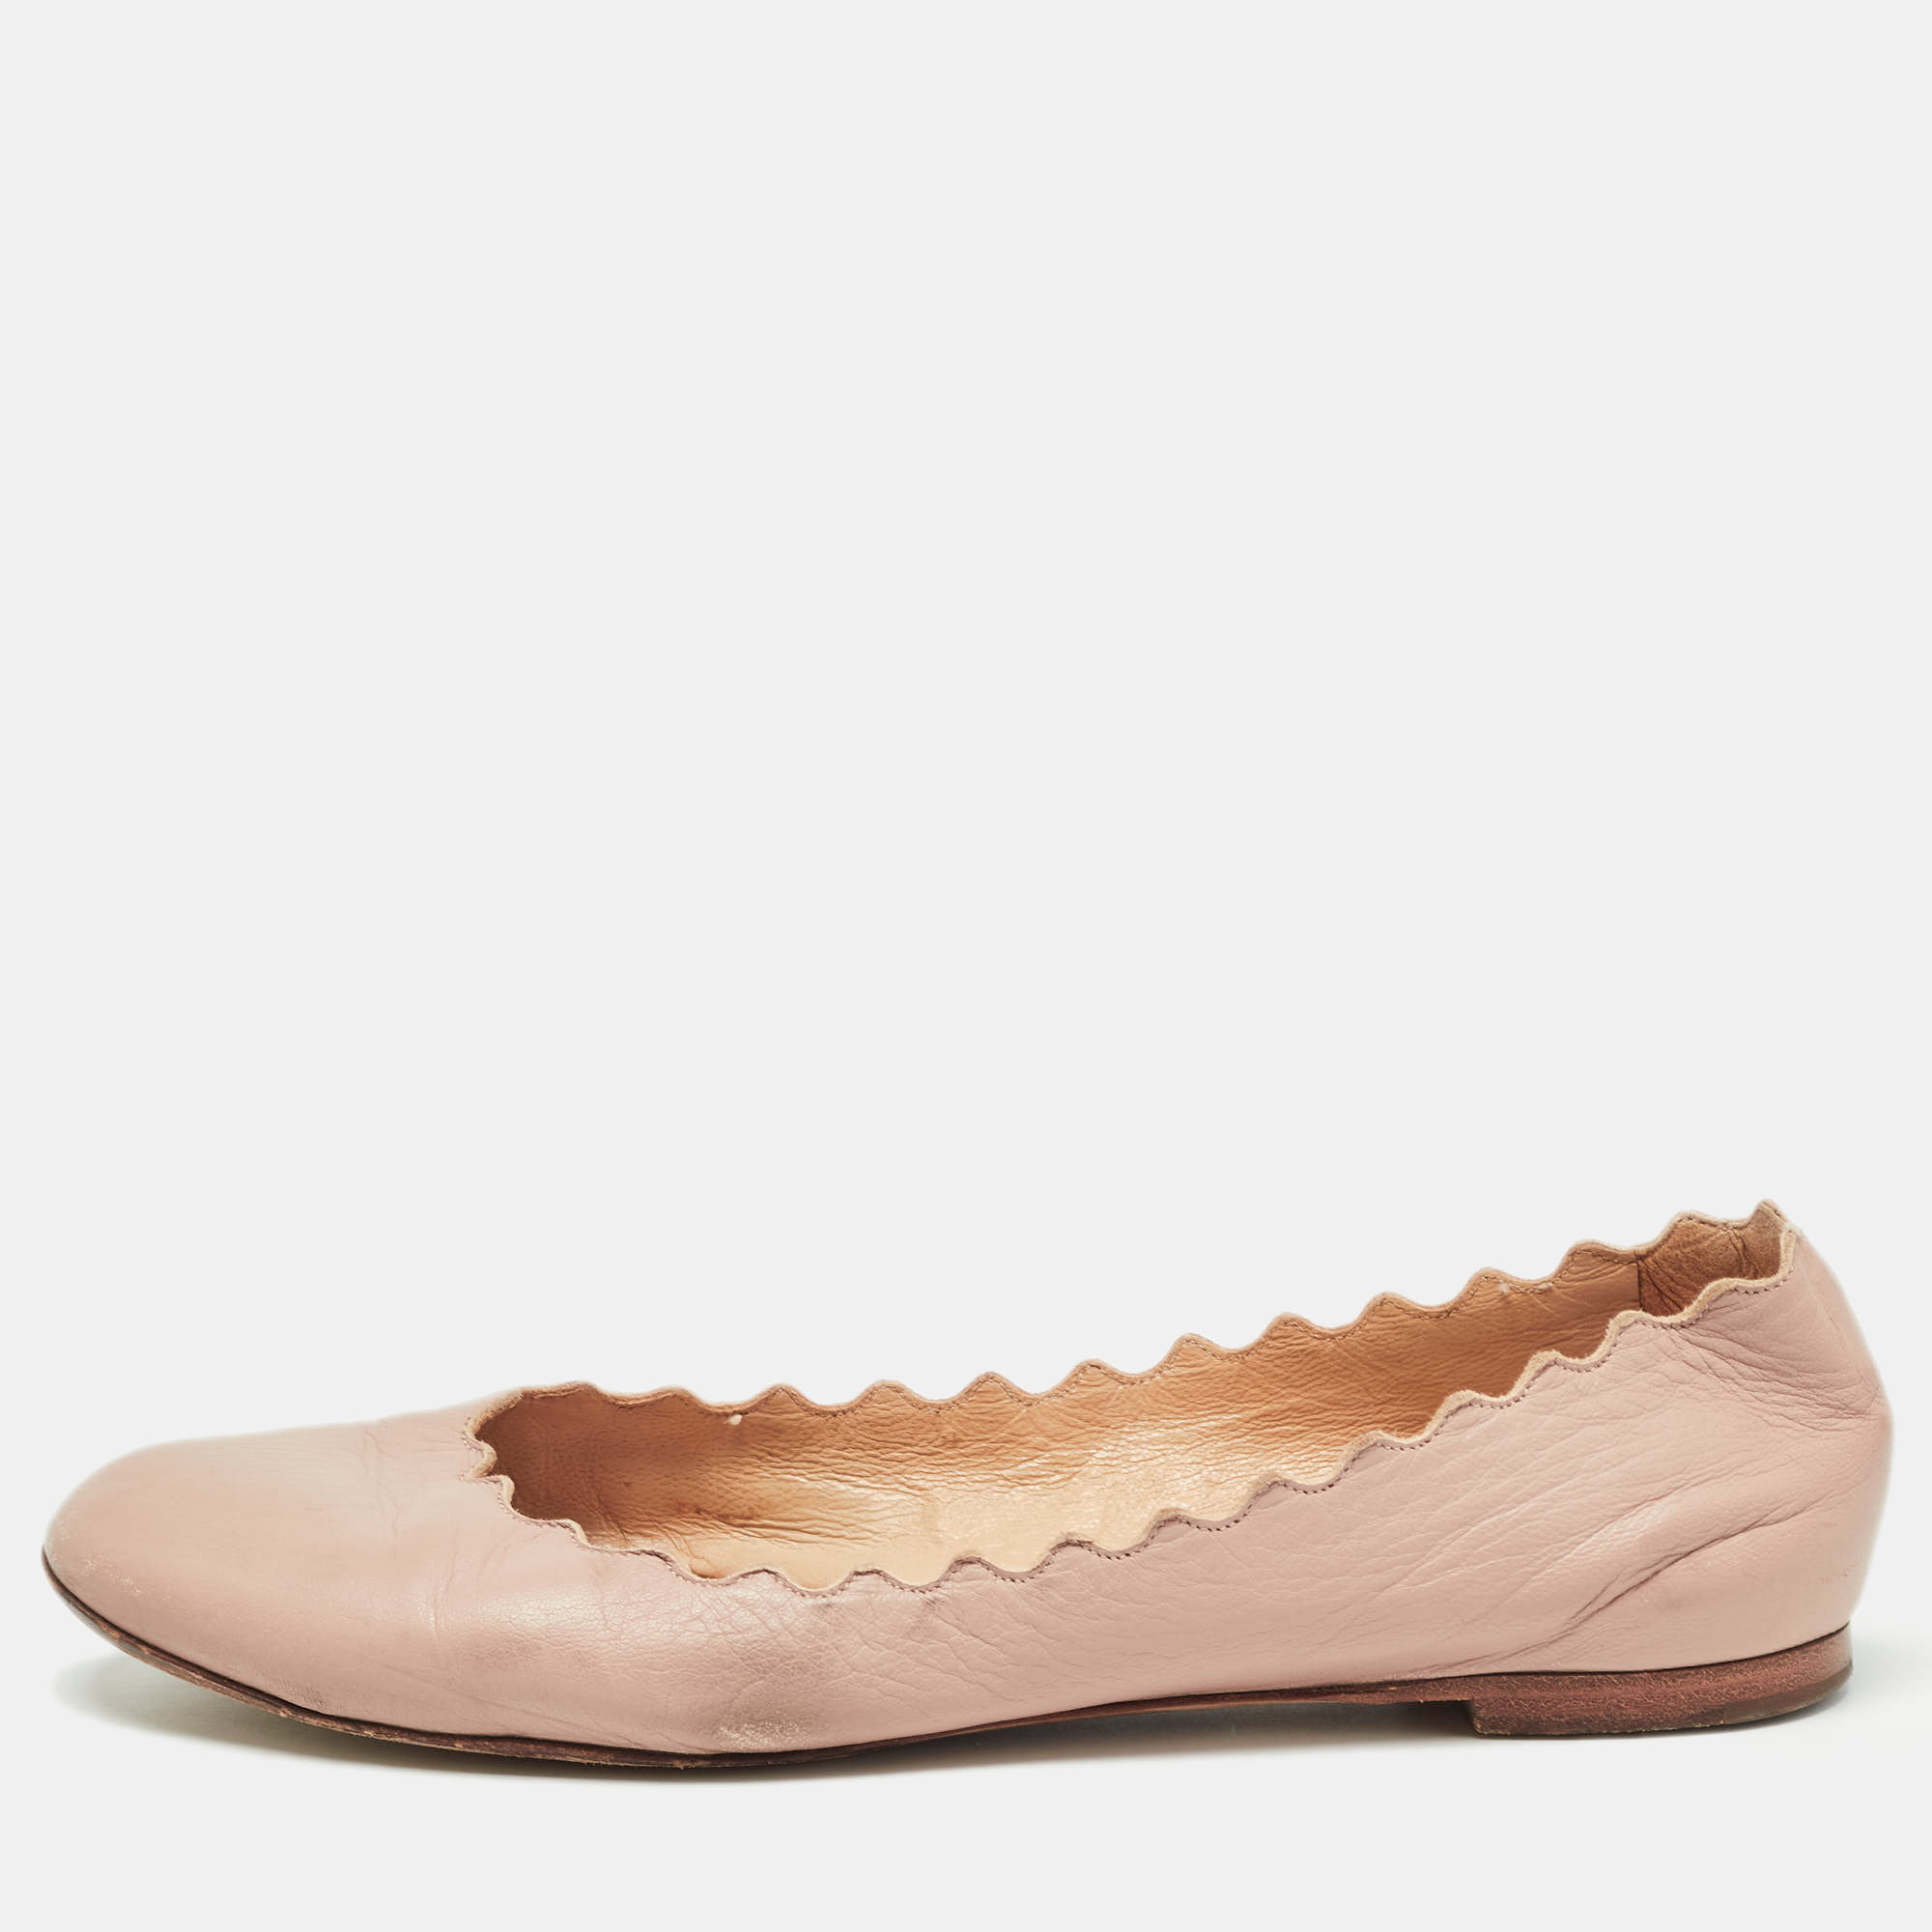 Pre-owned Chloé Pink Scalloped Leather Lauren Ballet Flats Size 37.5